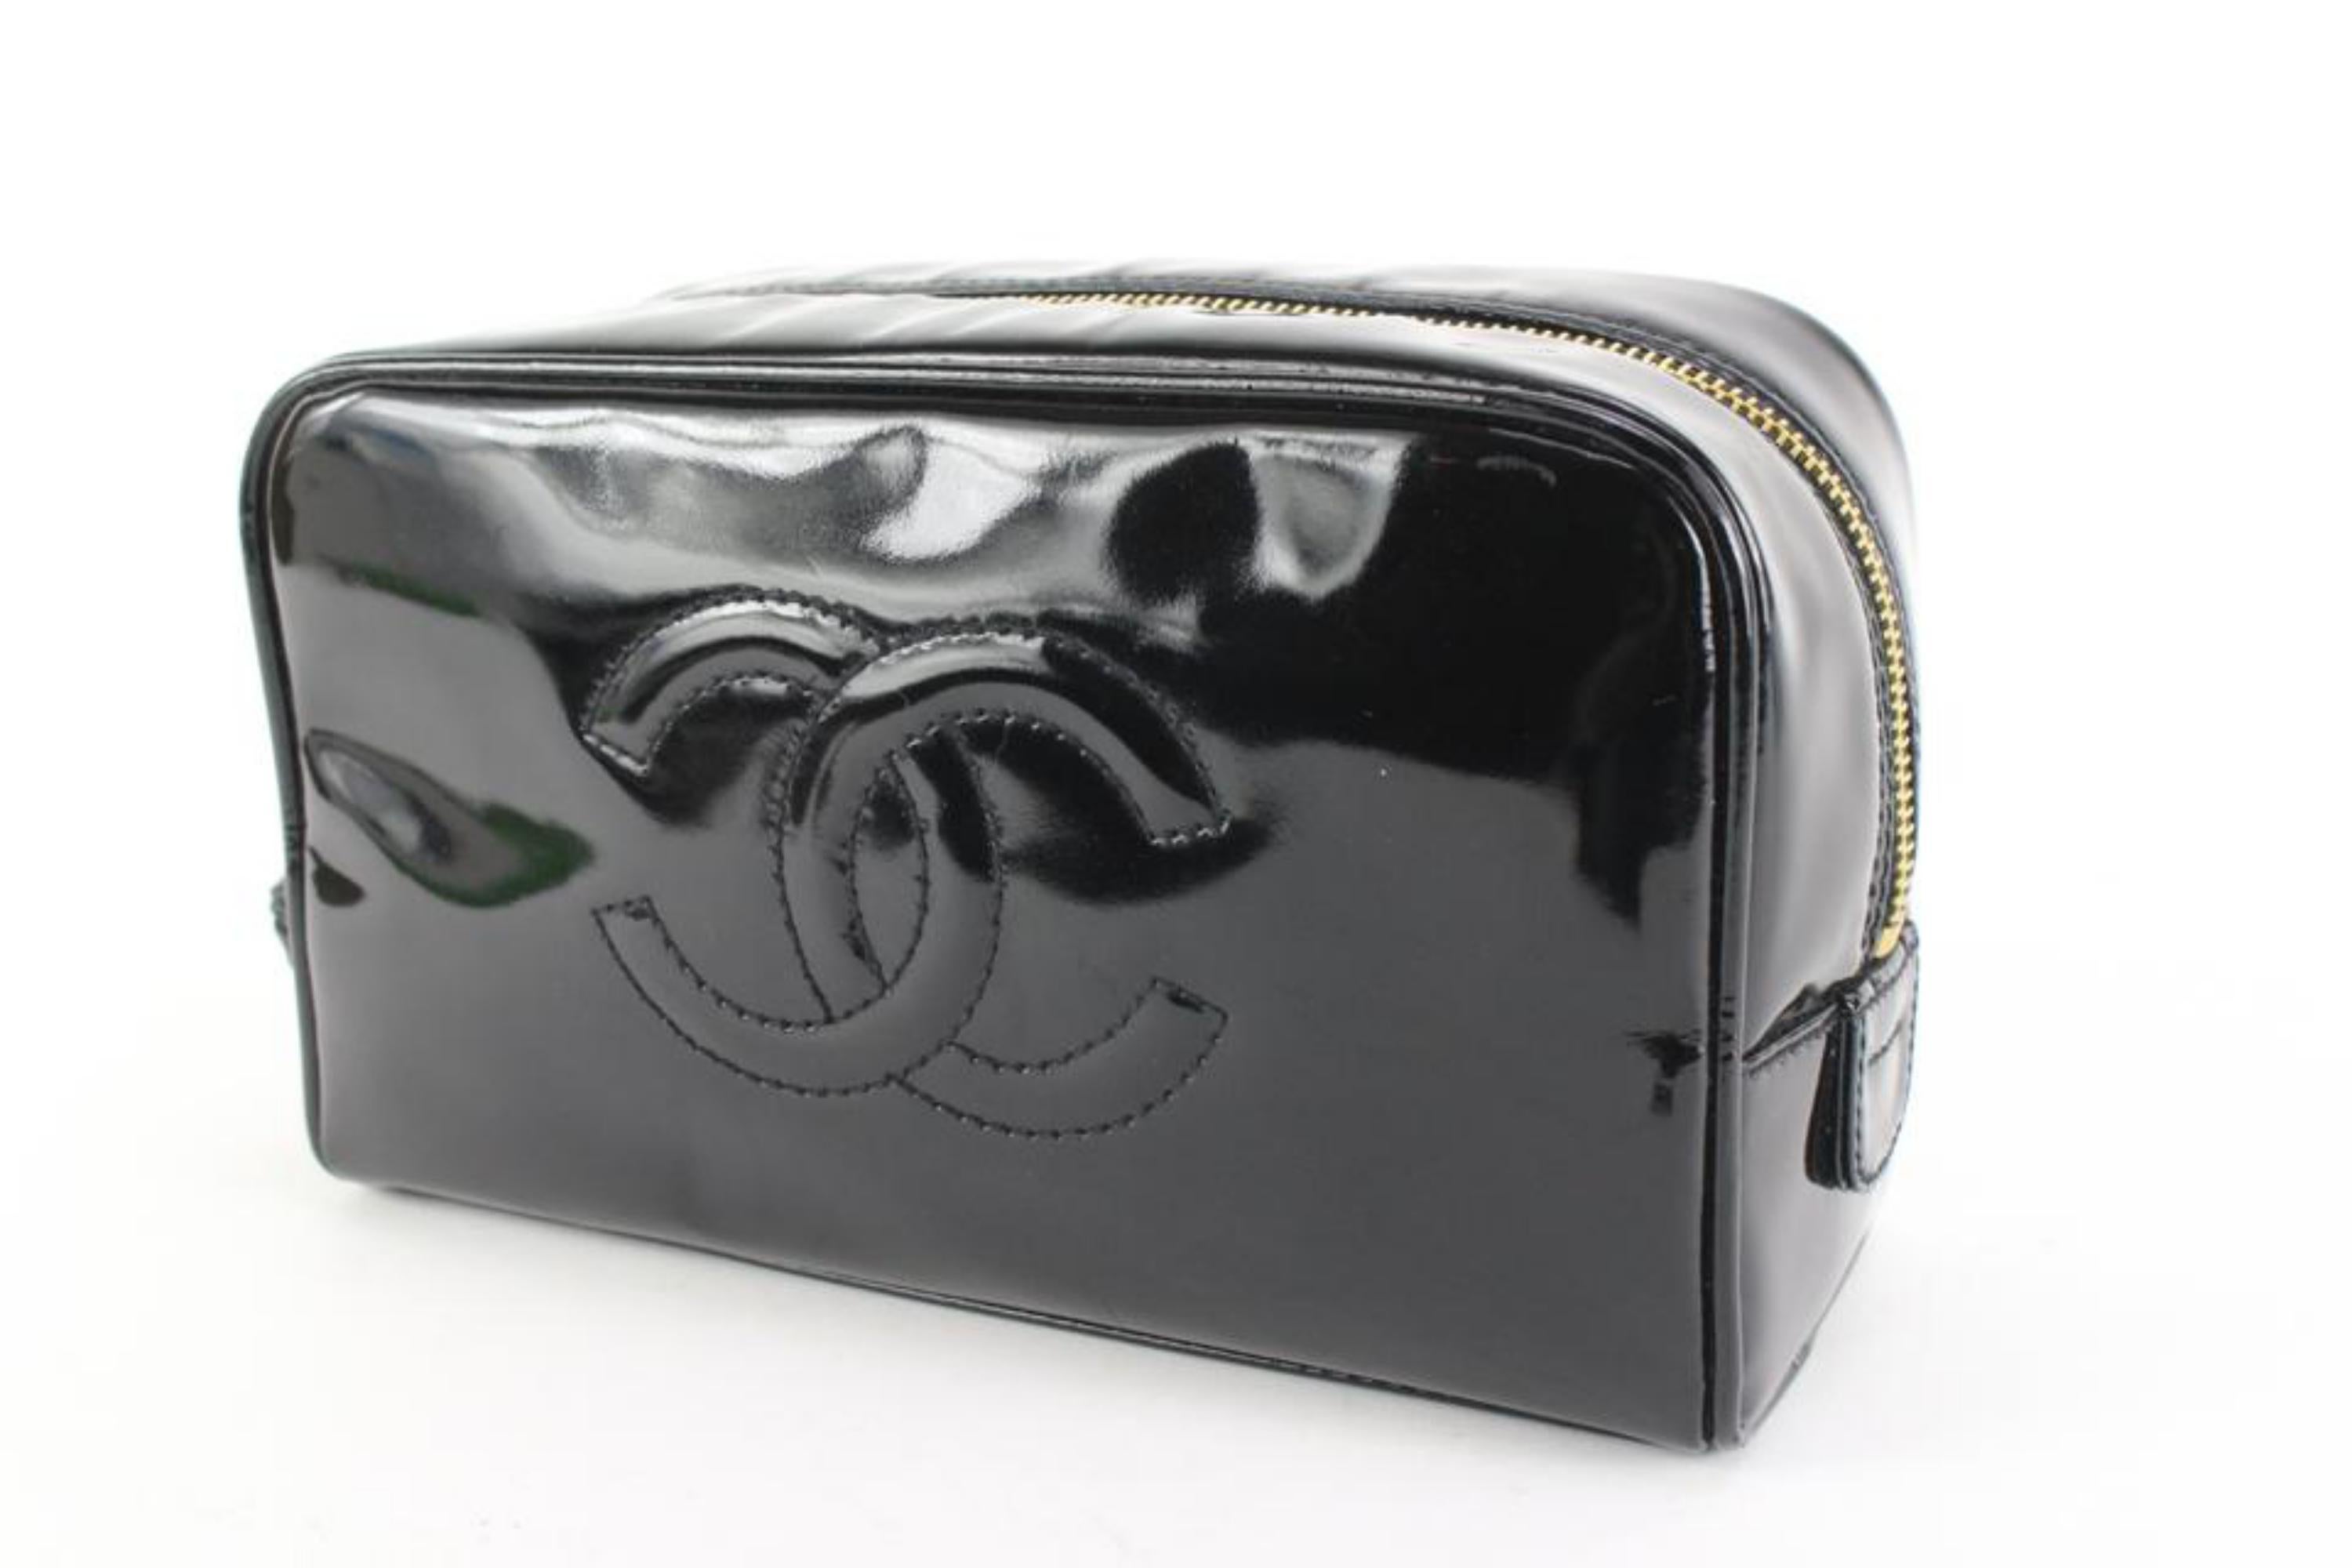 Chanel Black Patent CC Logo Toiletry Pouch Cosmetic Case 81cz56s 6